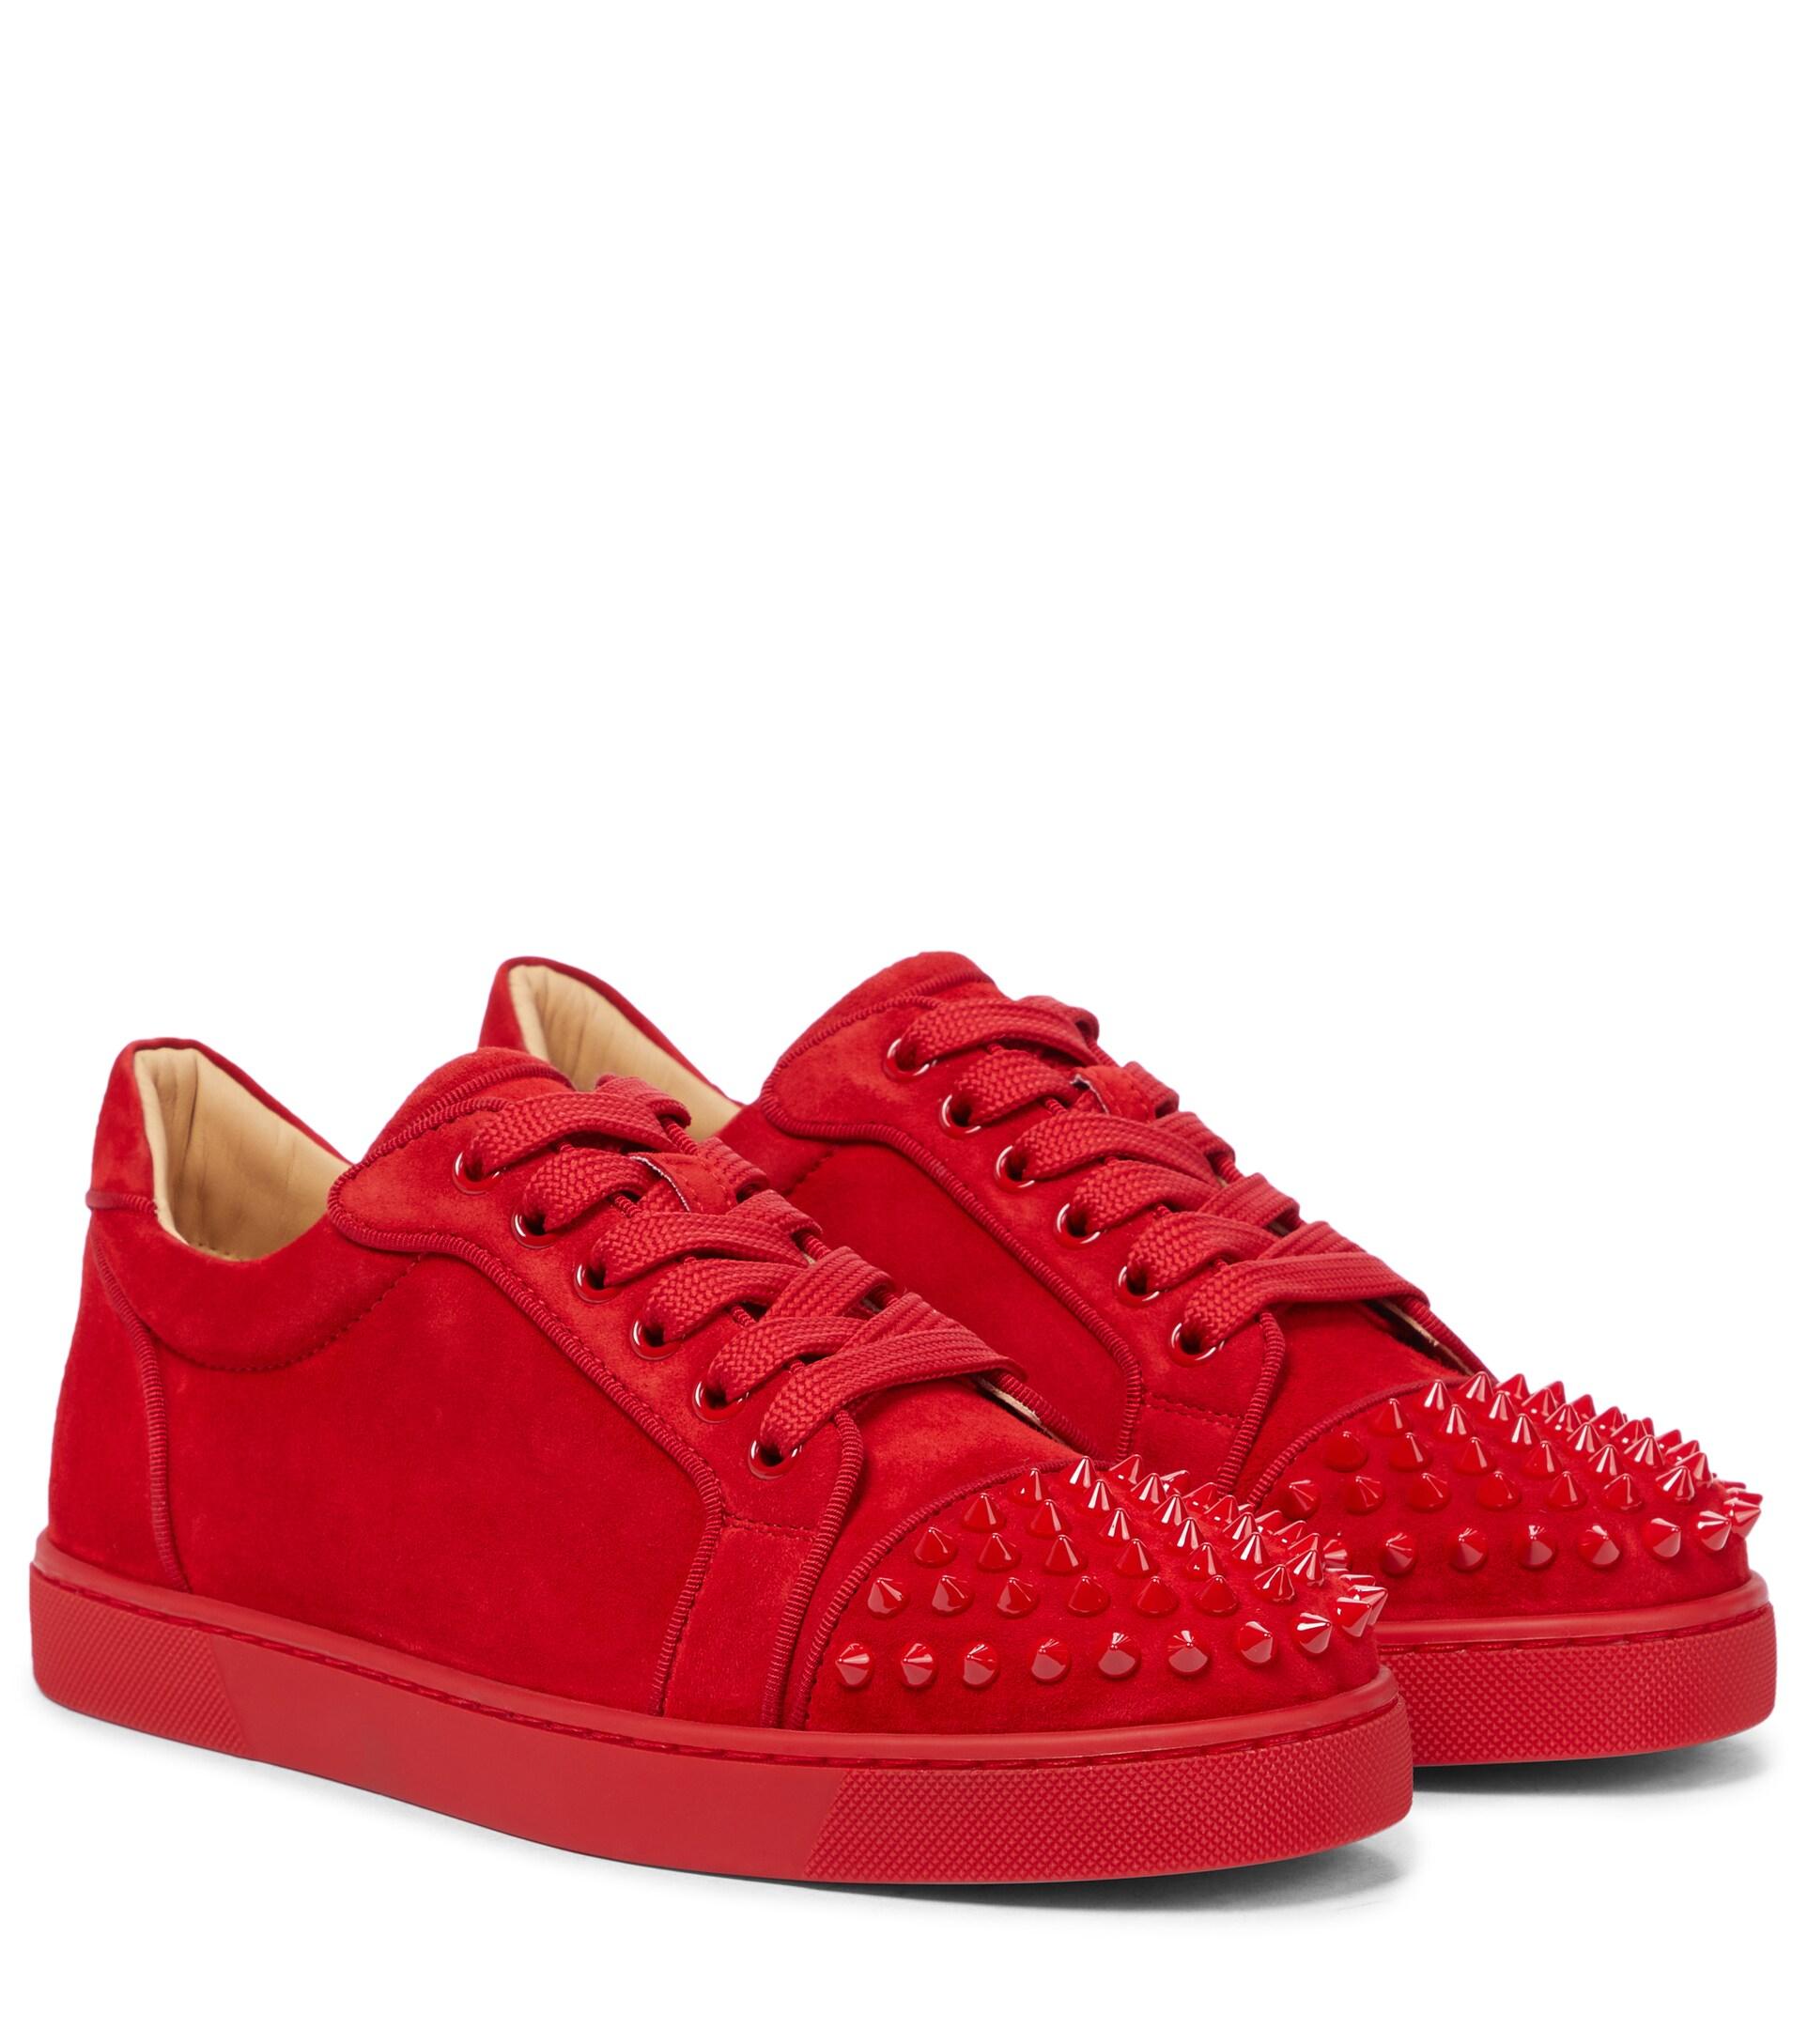 Christian Vieira Sneakers in Red | Lyst